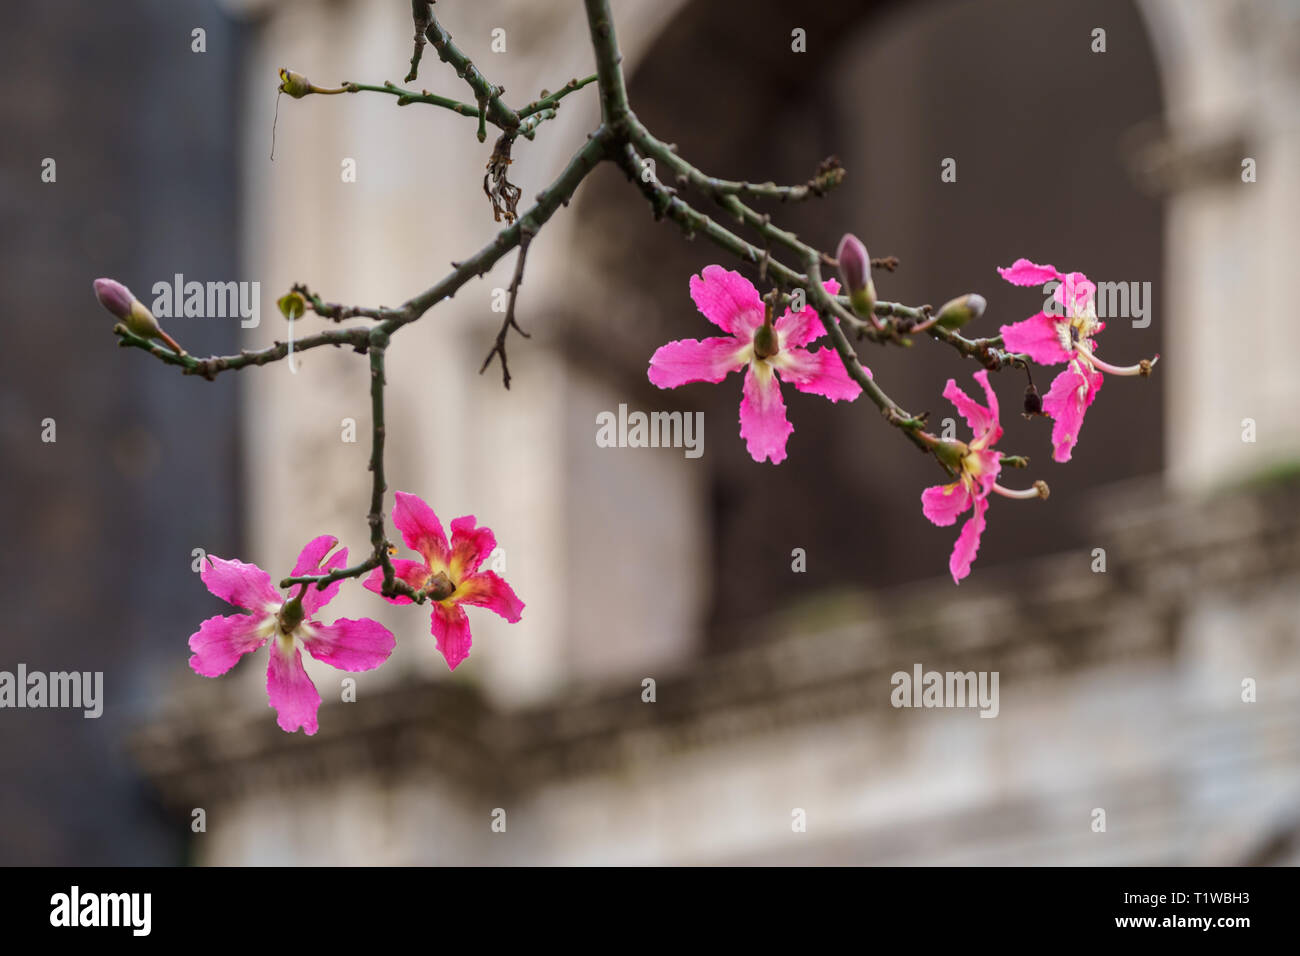 Silk floss tree or chorisia speciosa flowers in bloom with old walls as a background Stock Photo